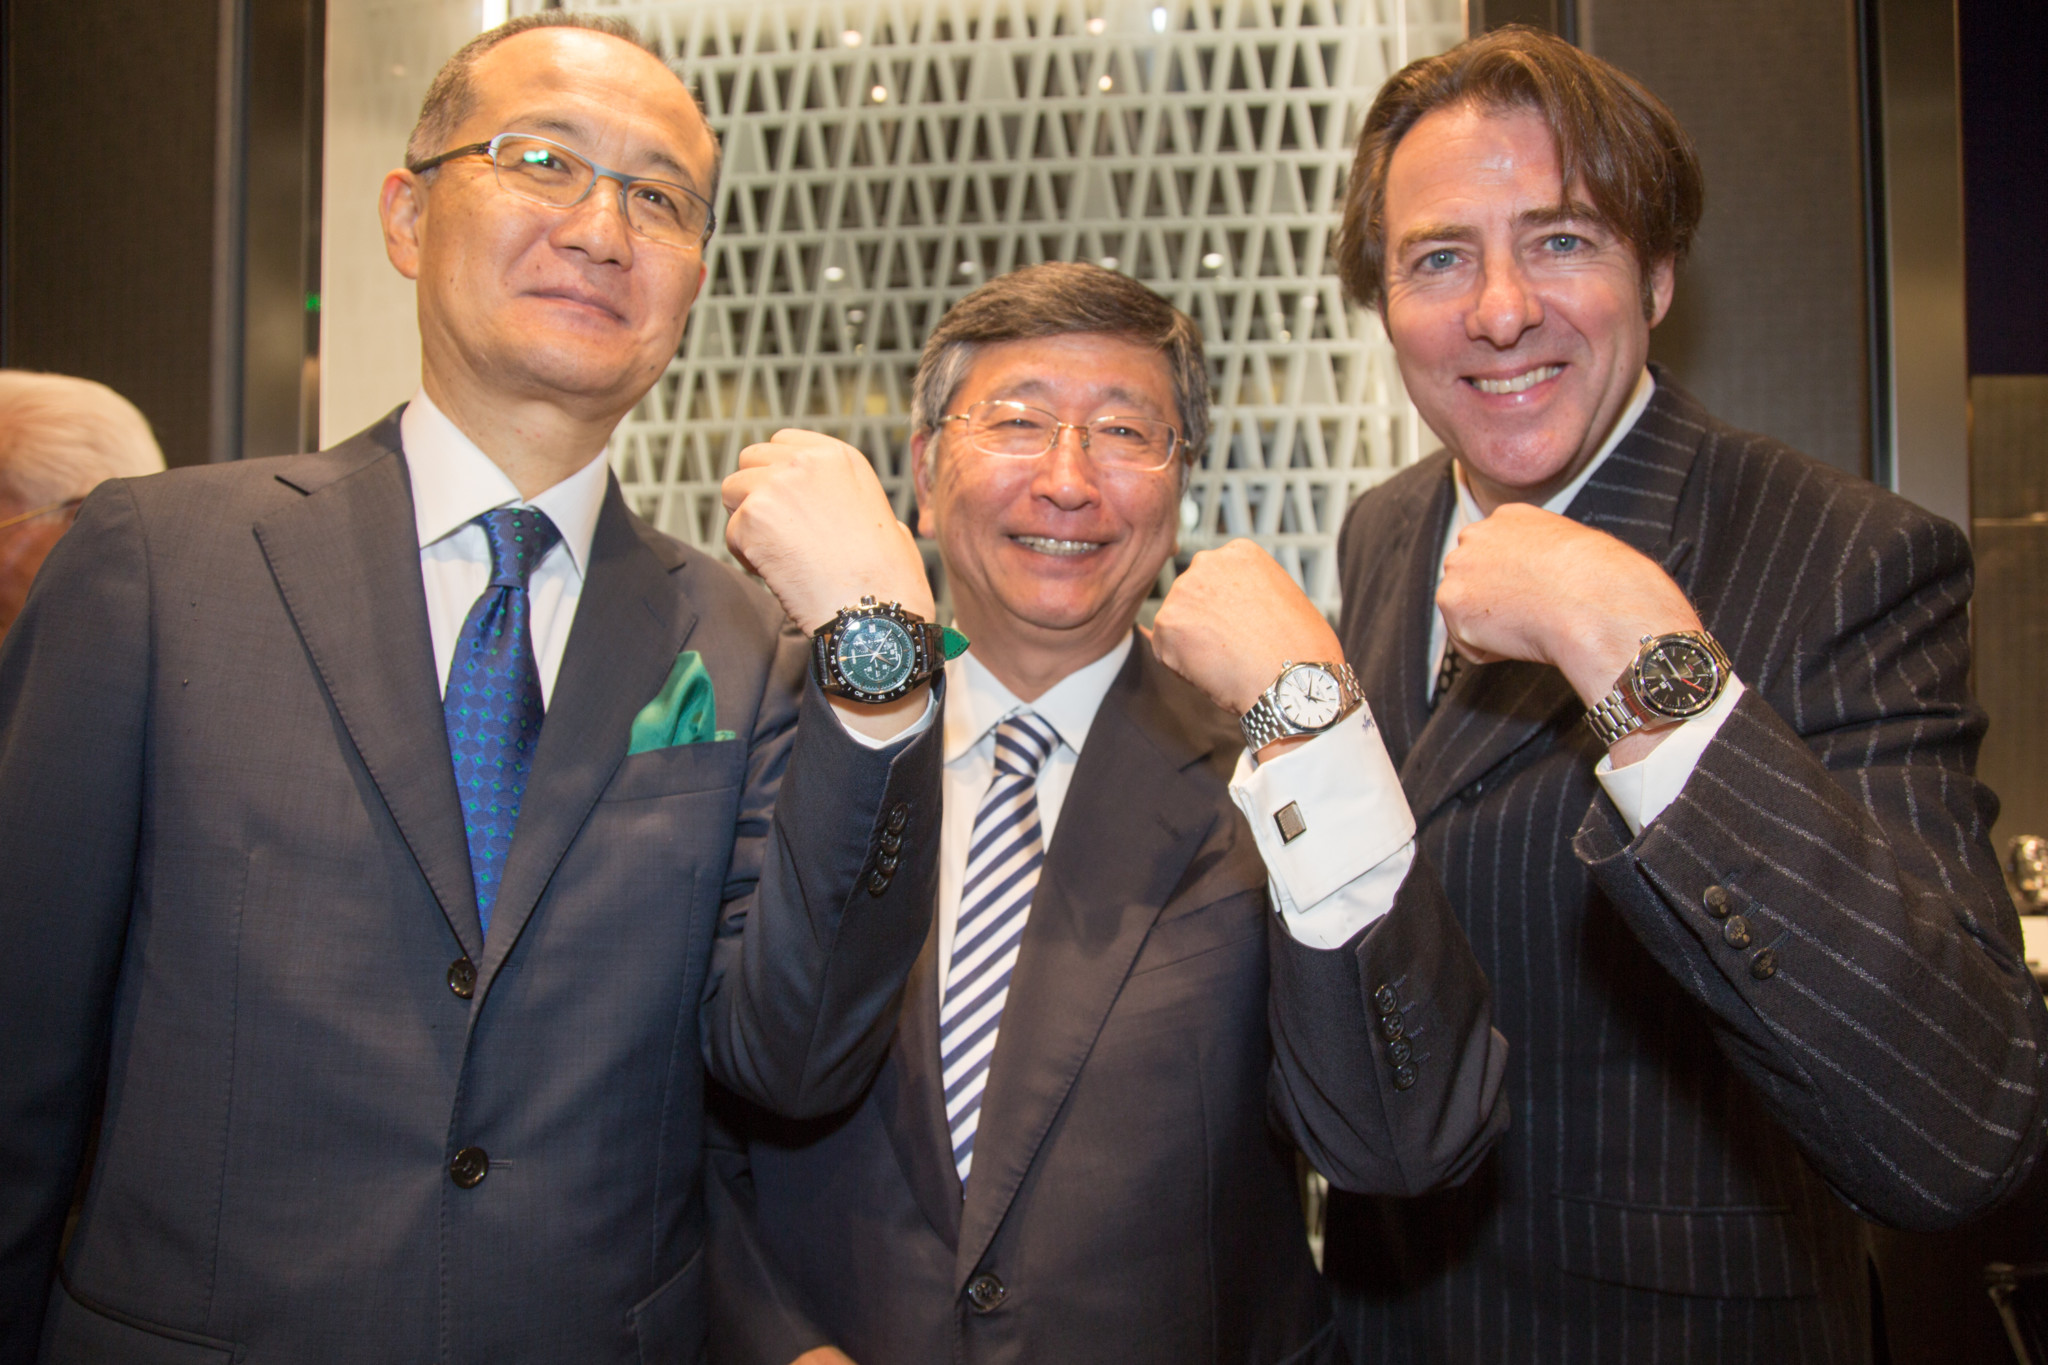 Seiko’s president and chief operating officer was joined by japan’s ambassador to the uk for the official opening of its flagship store in london last month. Shuji takahashi welcomed ambassador koji tsuruoka to the knightsbridge store, along with invited guests and media. Instead of the usual ribbon-cutting, the store was officially opened when a ceremonial barrel of saki was broken open. Tv celebrity jonathan ross — who is a passionate student of japanese culture — helped with the honours. Seiko may be best known for watches priced at under £200, but none of them are on show at the flagship, which has harrods, harvey nichols, watches of switzerland and the one hyde park rolex boutique as neighbours in one of london’s most affluent shopping streets. Half the store is devoted to grand seiko, the top end of the seiko family, which is a fully integrated manufacture that makes everything from hairsprings to complete movements and cases. The remainder of the boutique displays high end seiko elite models from astron, presage and prestige collections, the majority of which carry four-figure price tags. The store even displays credor watches, the highest horological watch brand in the seiko family. Mr takahashi said that the store is more than just a point of sale for london, it is a “global flagship” designed to raise the profile of seiko in the uk and for visitors from around the world. He added that seiko’s retail partners will benefit from the opening of the flagship because it will raise the prestige of the seiko brand in the country. “every city where we we have opened our own boutique has seen retailers benefit from the increased profile it brings,” mr takahashi added.